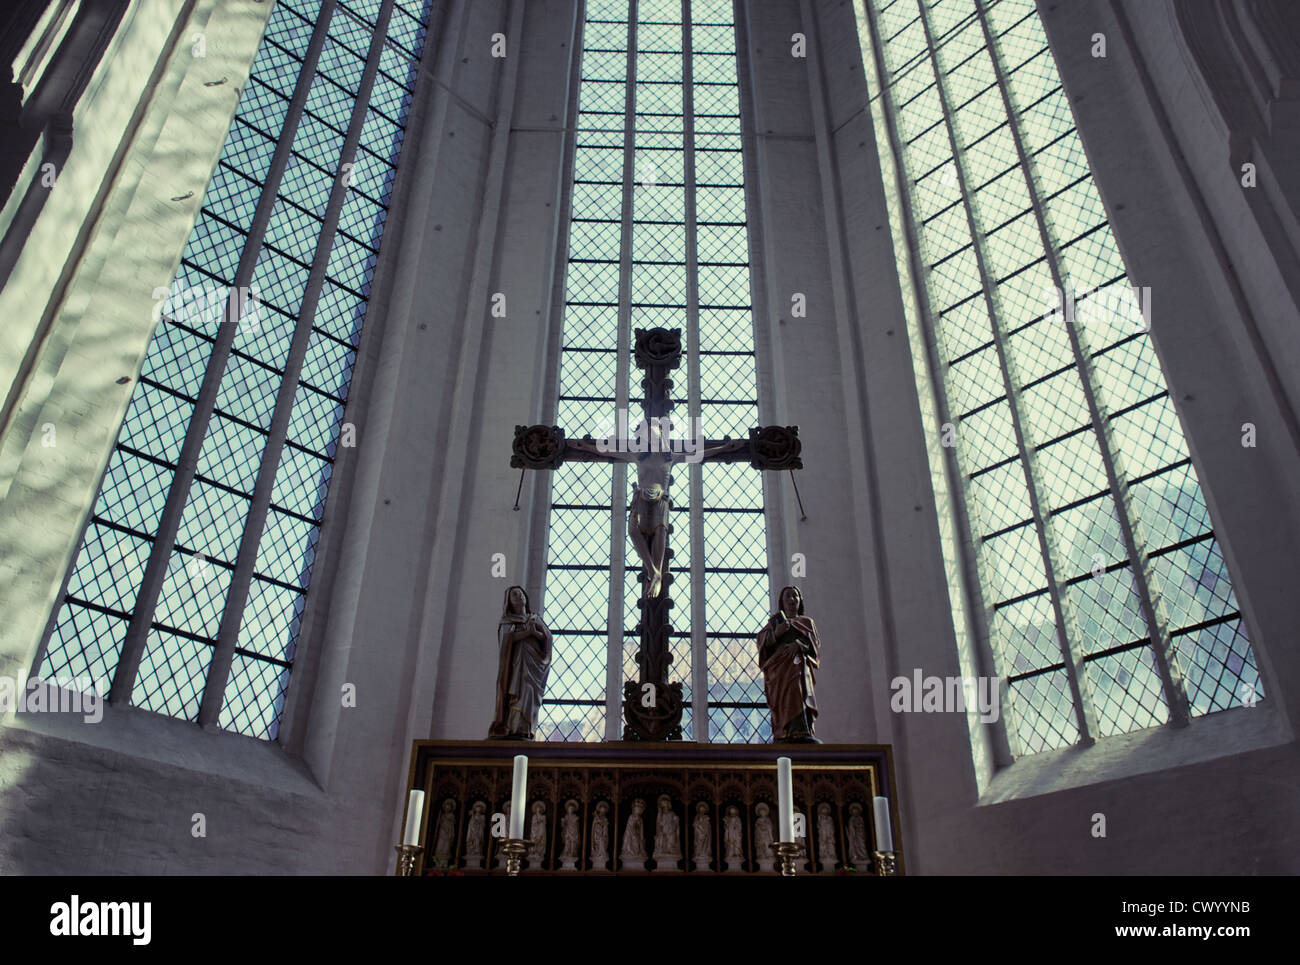 ALTAR OF HADERSLEV CATHEDRAL Stock Photo